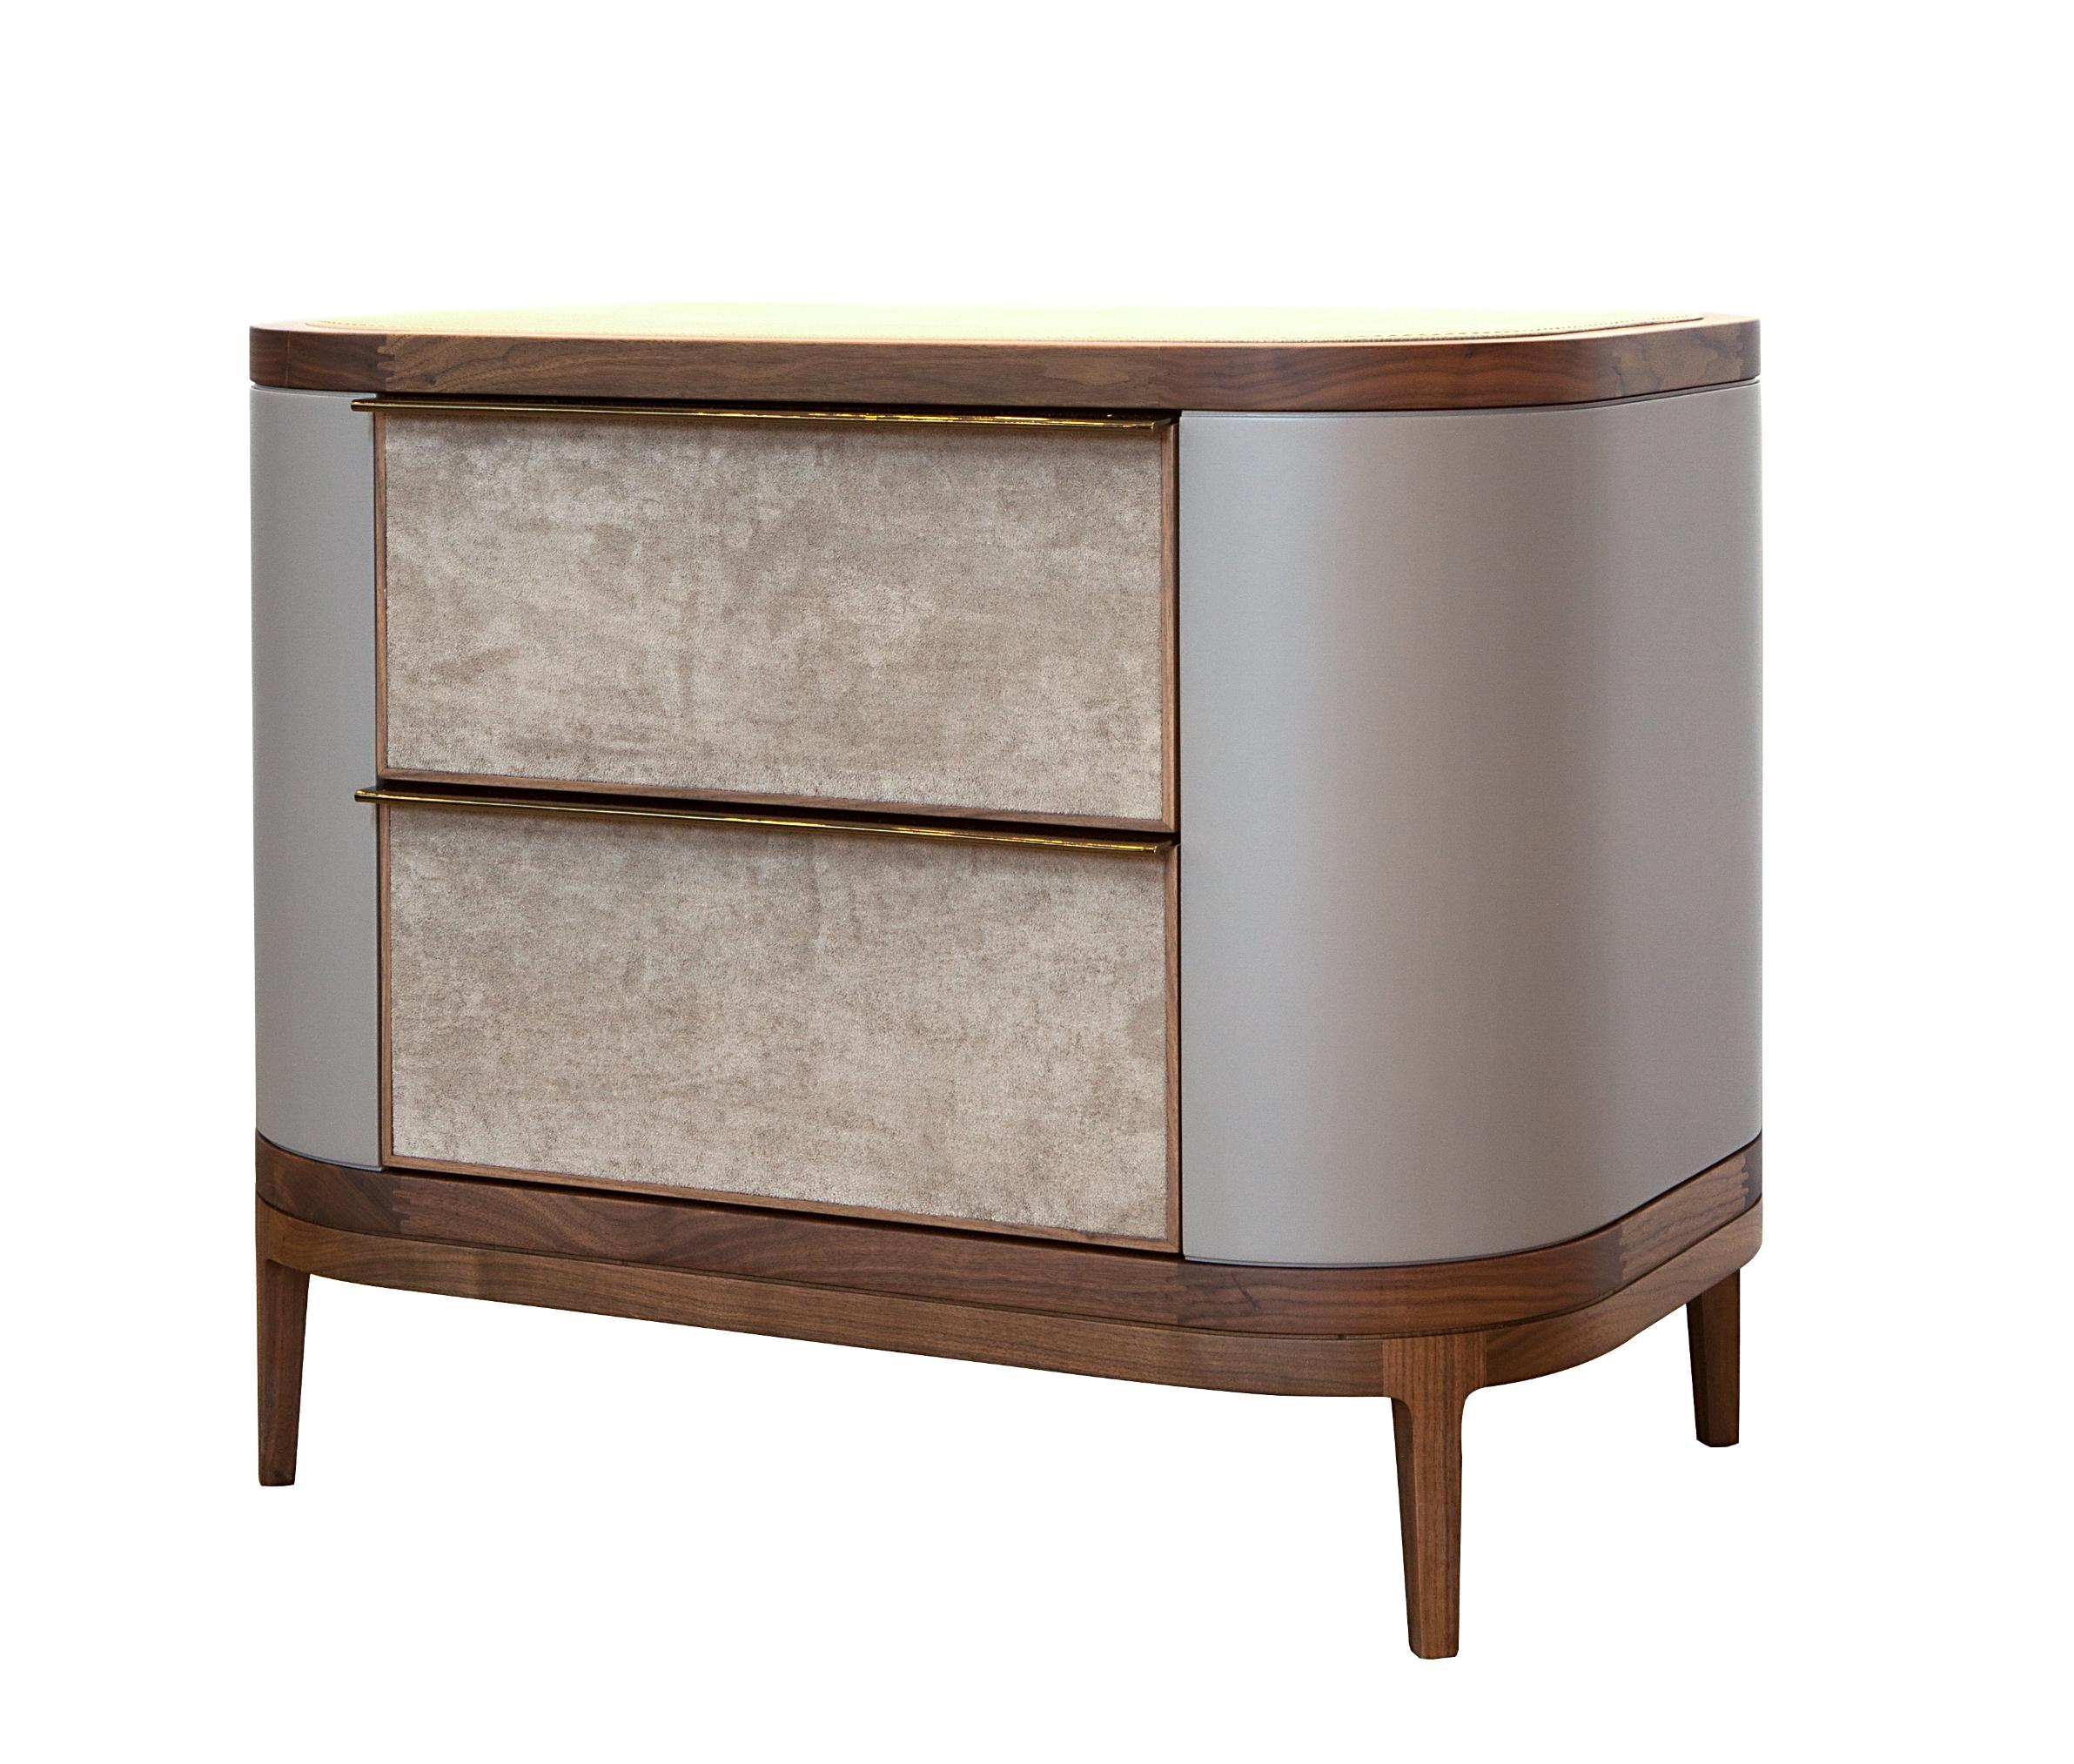 The perfect companion to the Manhattan bed, this leather wrapped nightstand features an inset leather top and drawers accented with metal detailing.